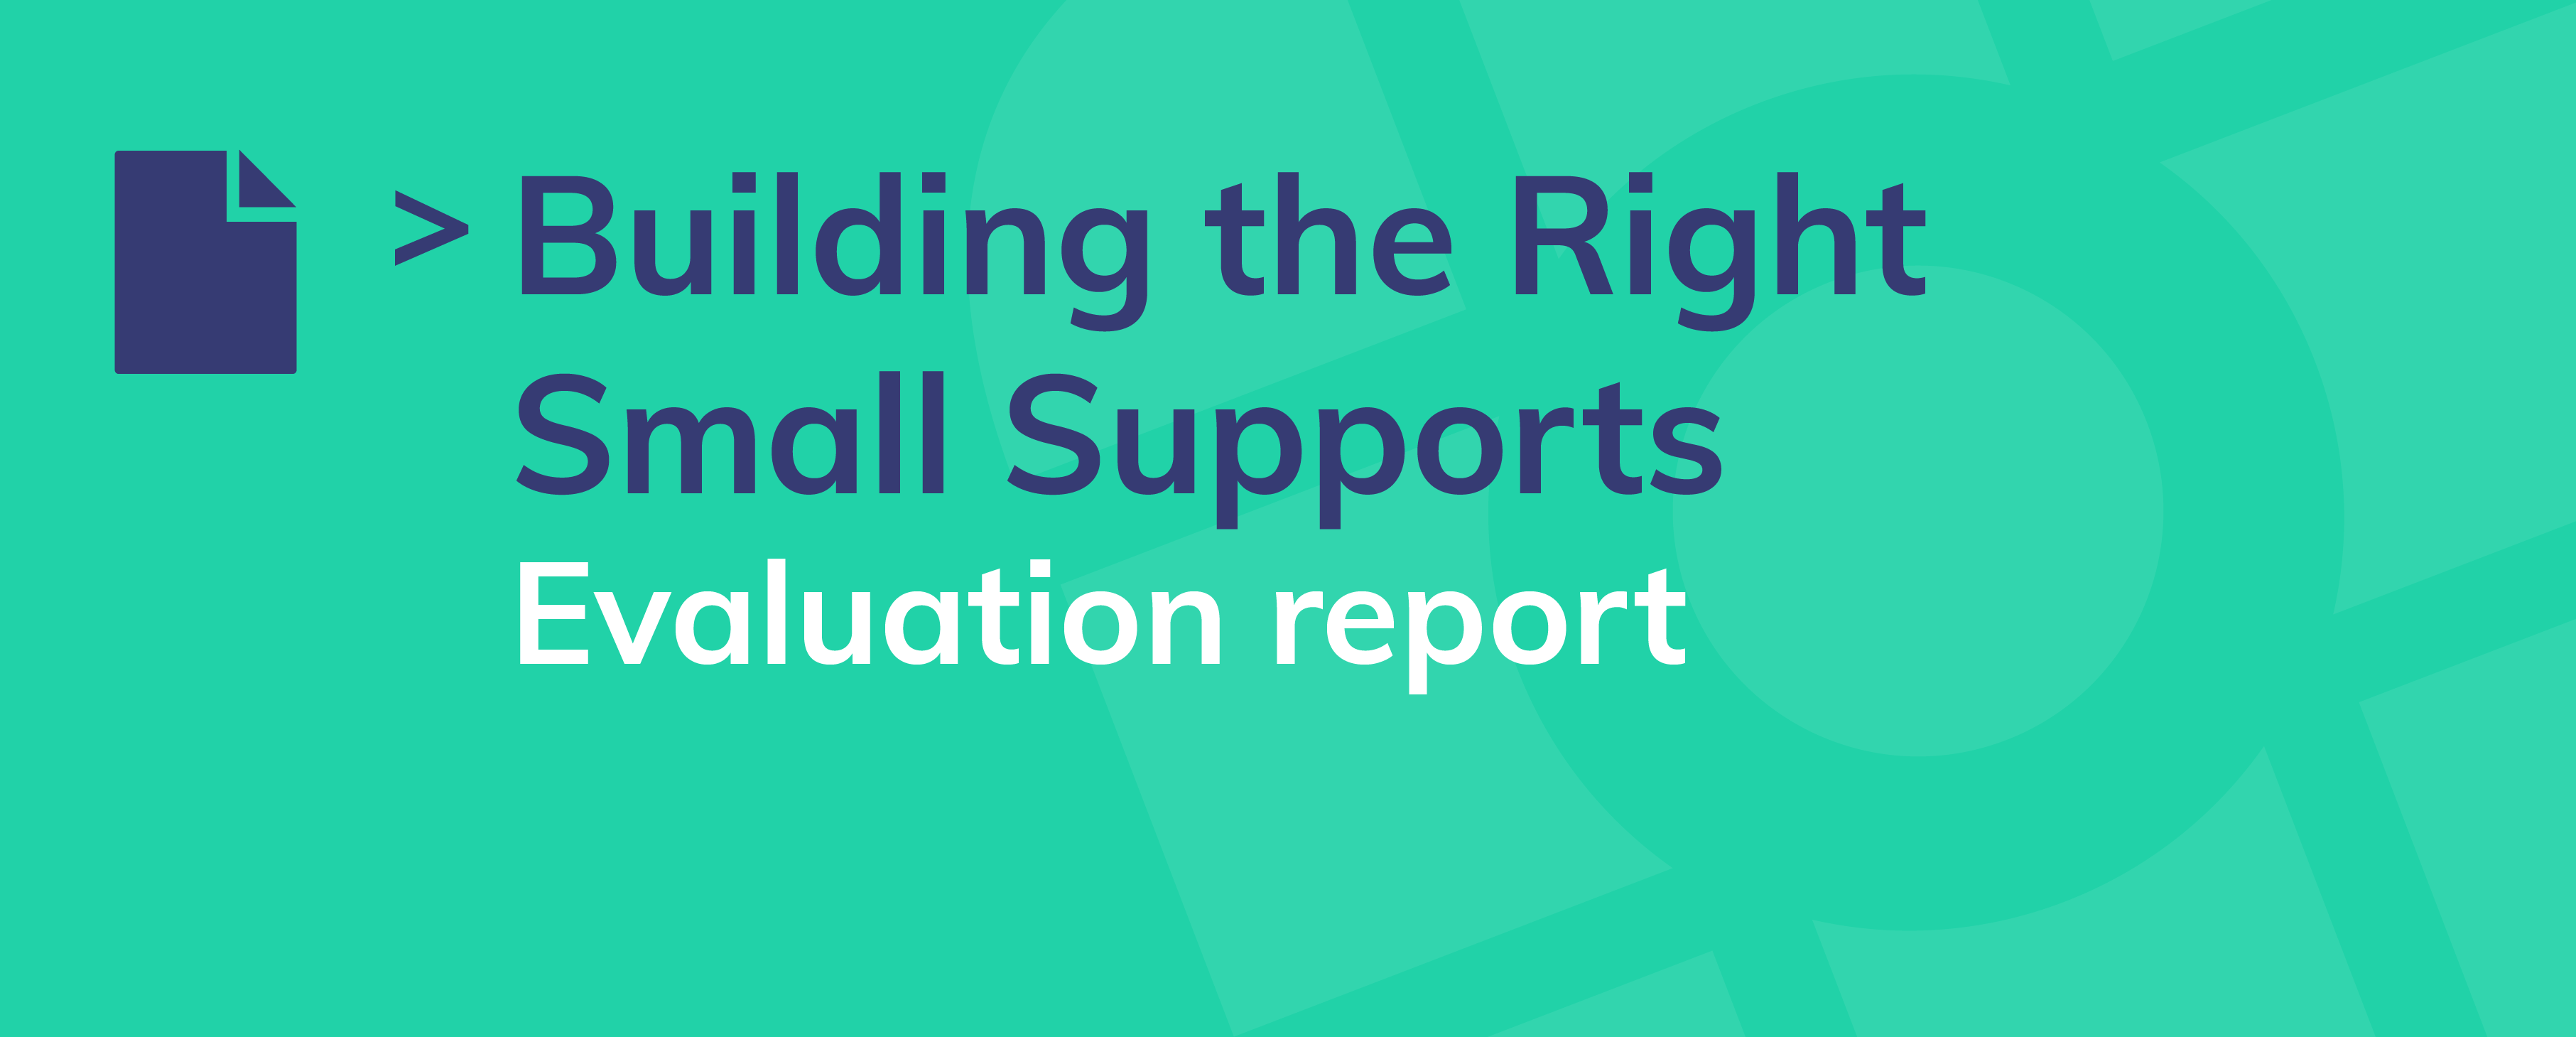 Small supports evaluation report 1 01